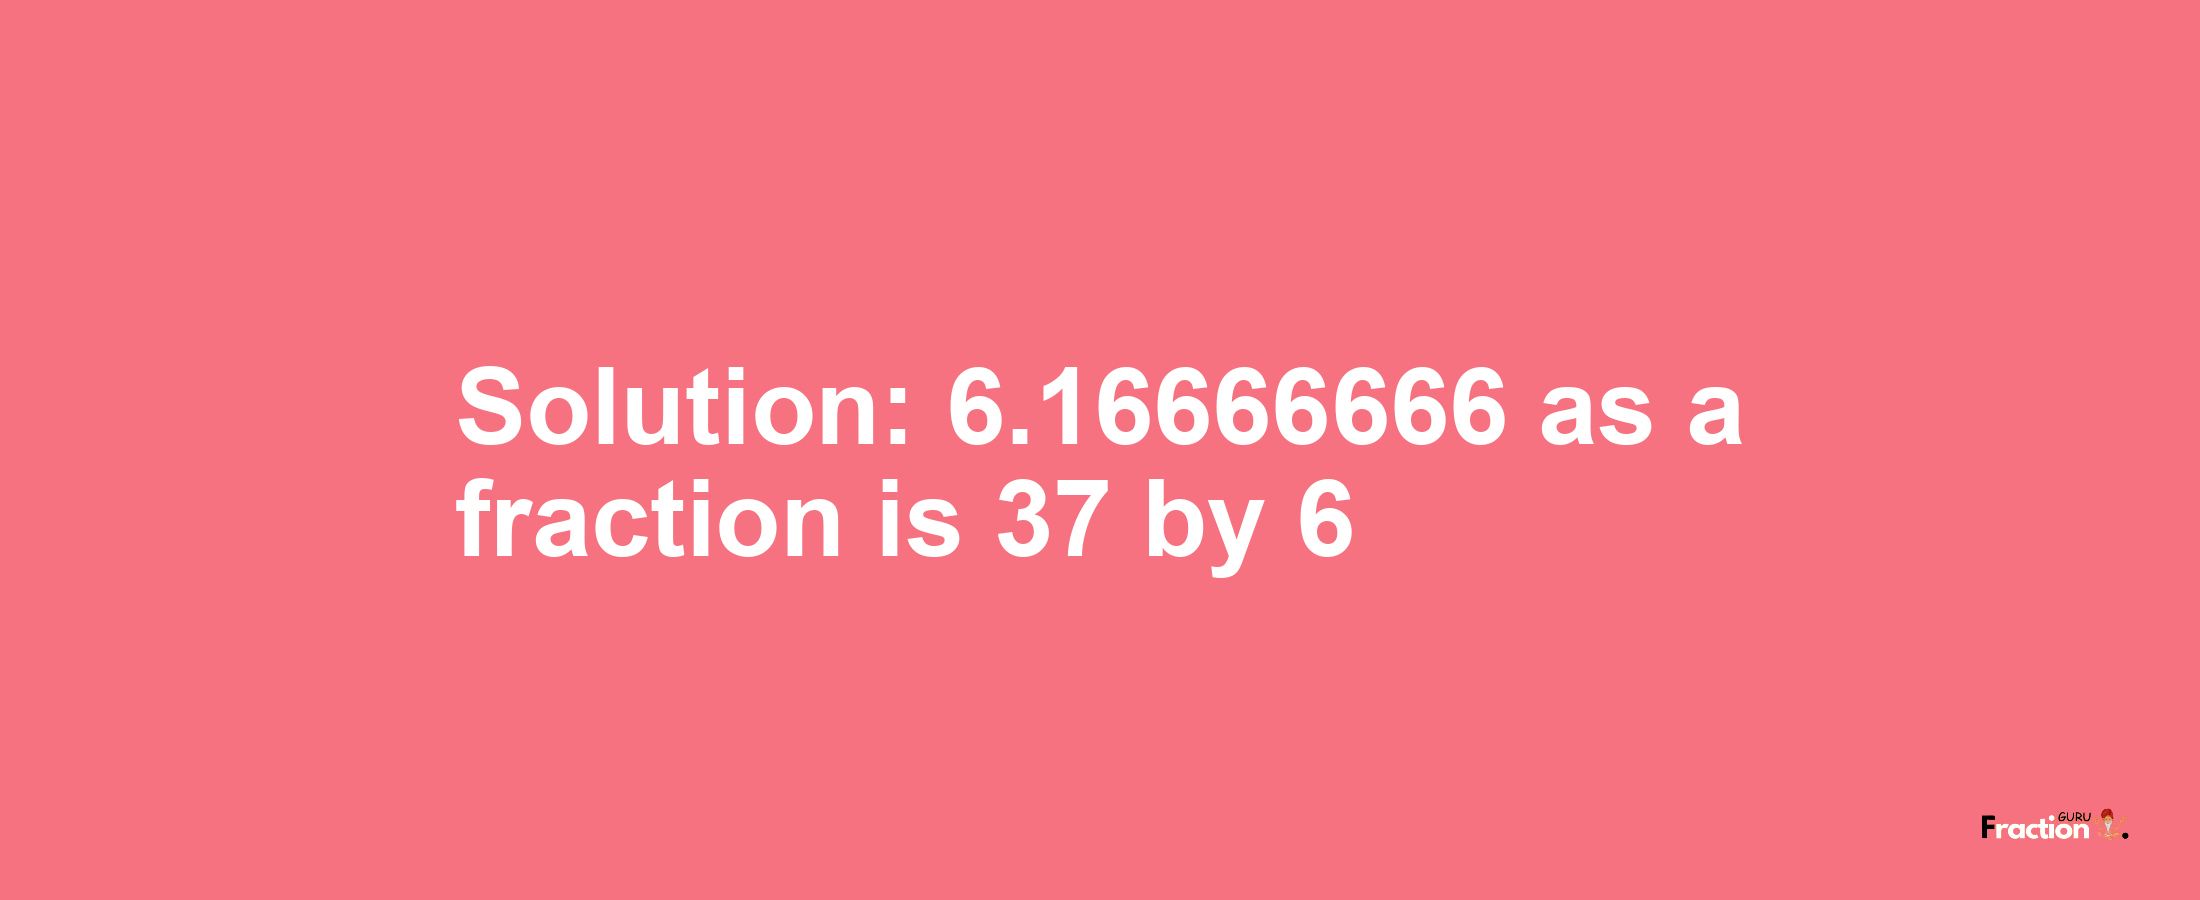 Solution:6.16666666 as a fraction is 37/6